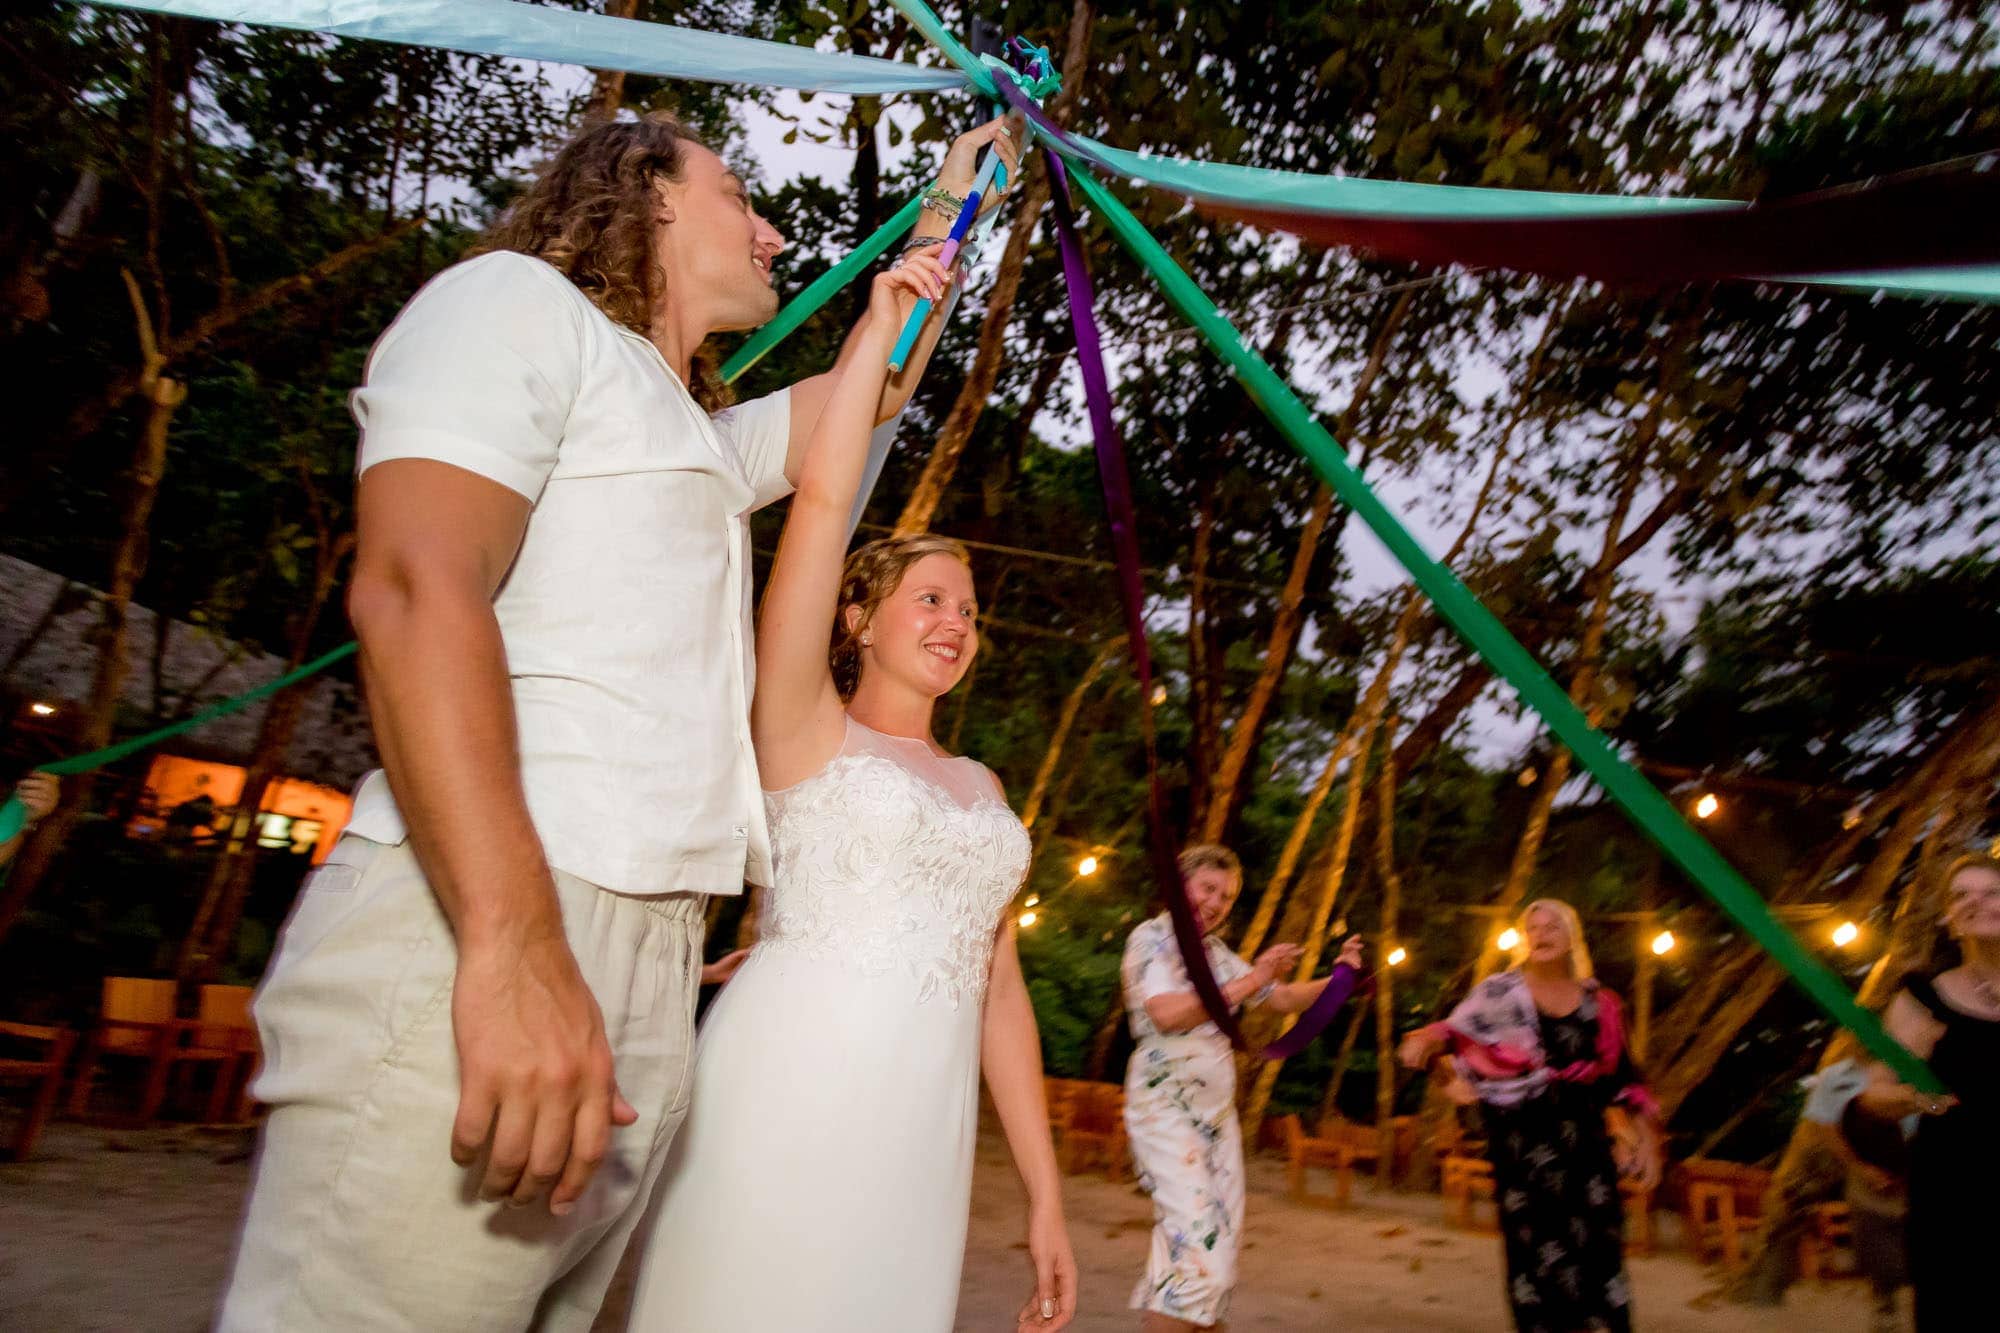 The bride and groom being the maypole for the maypole dance